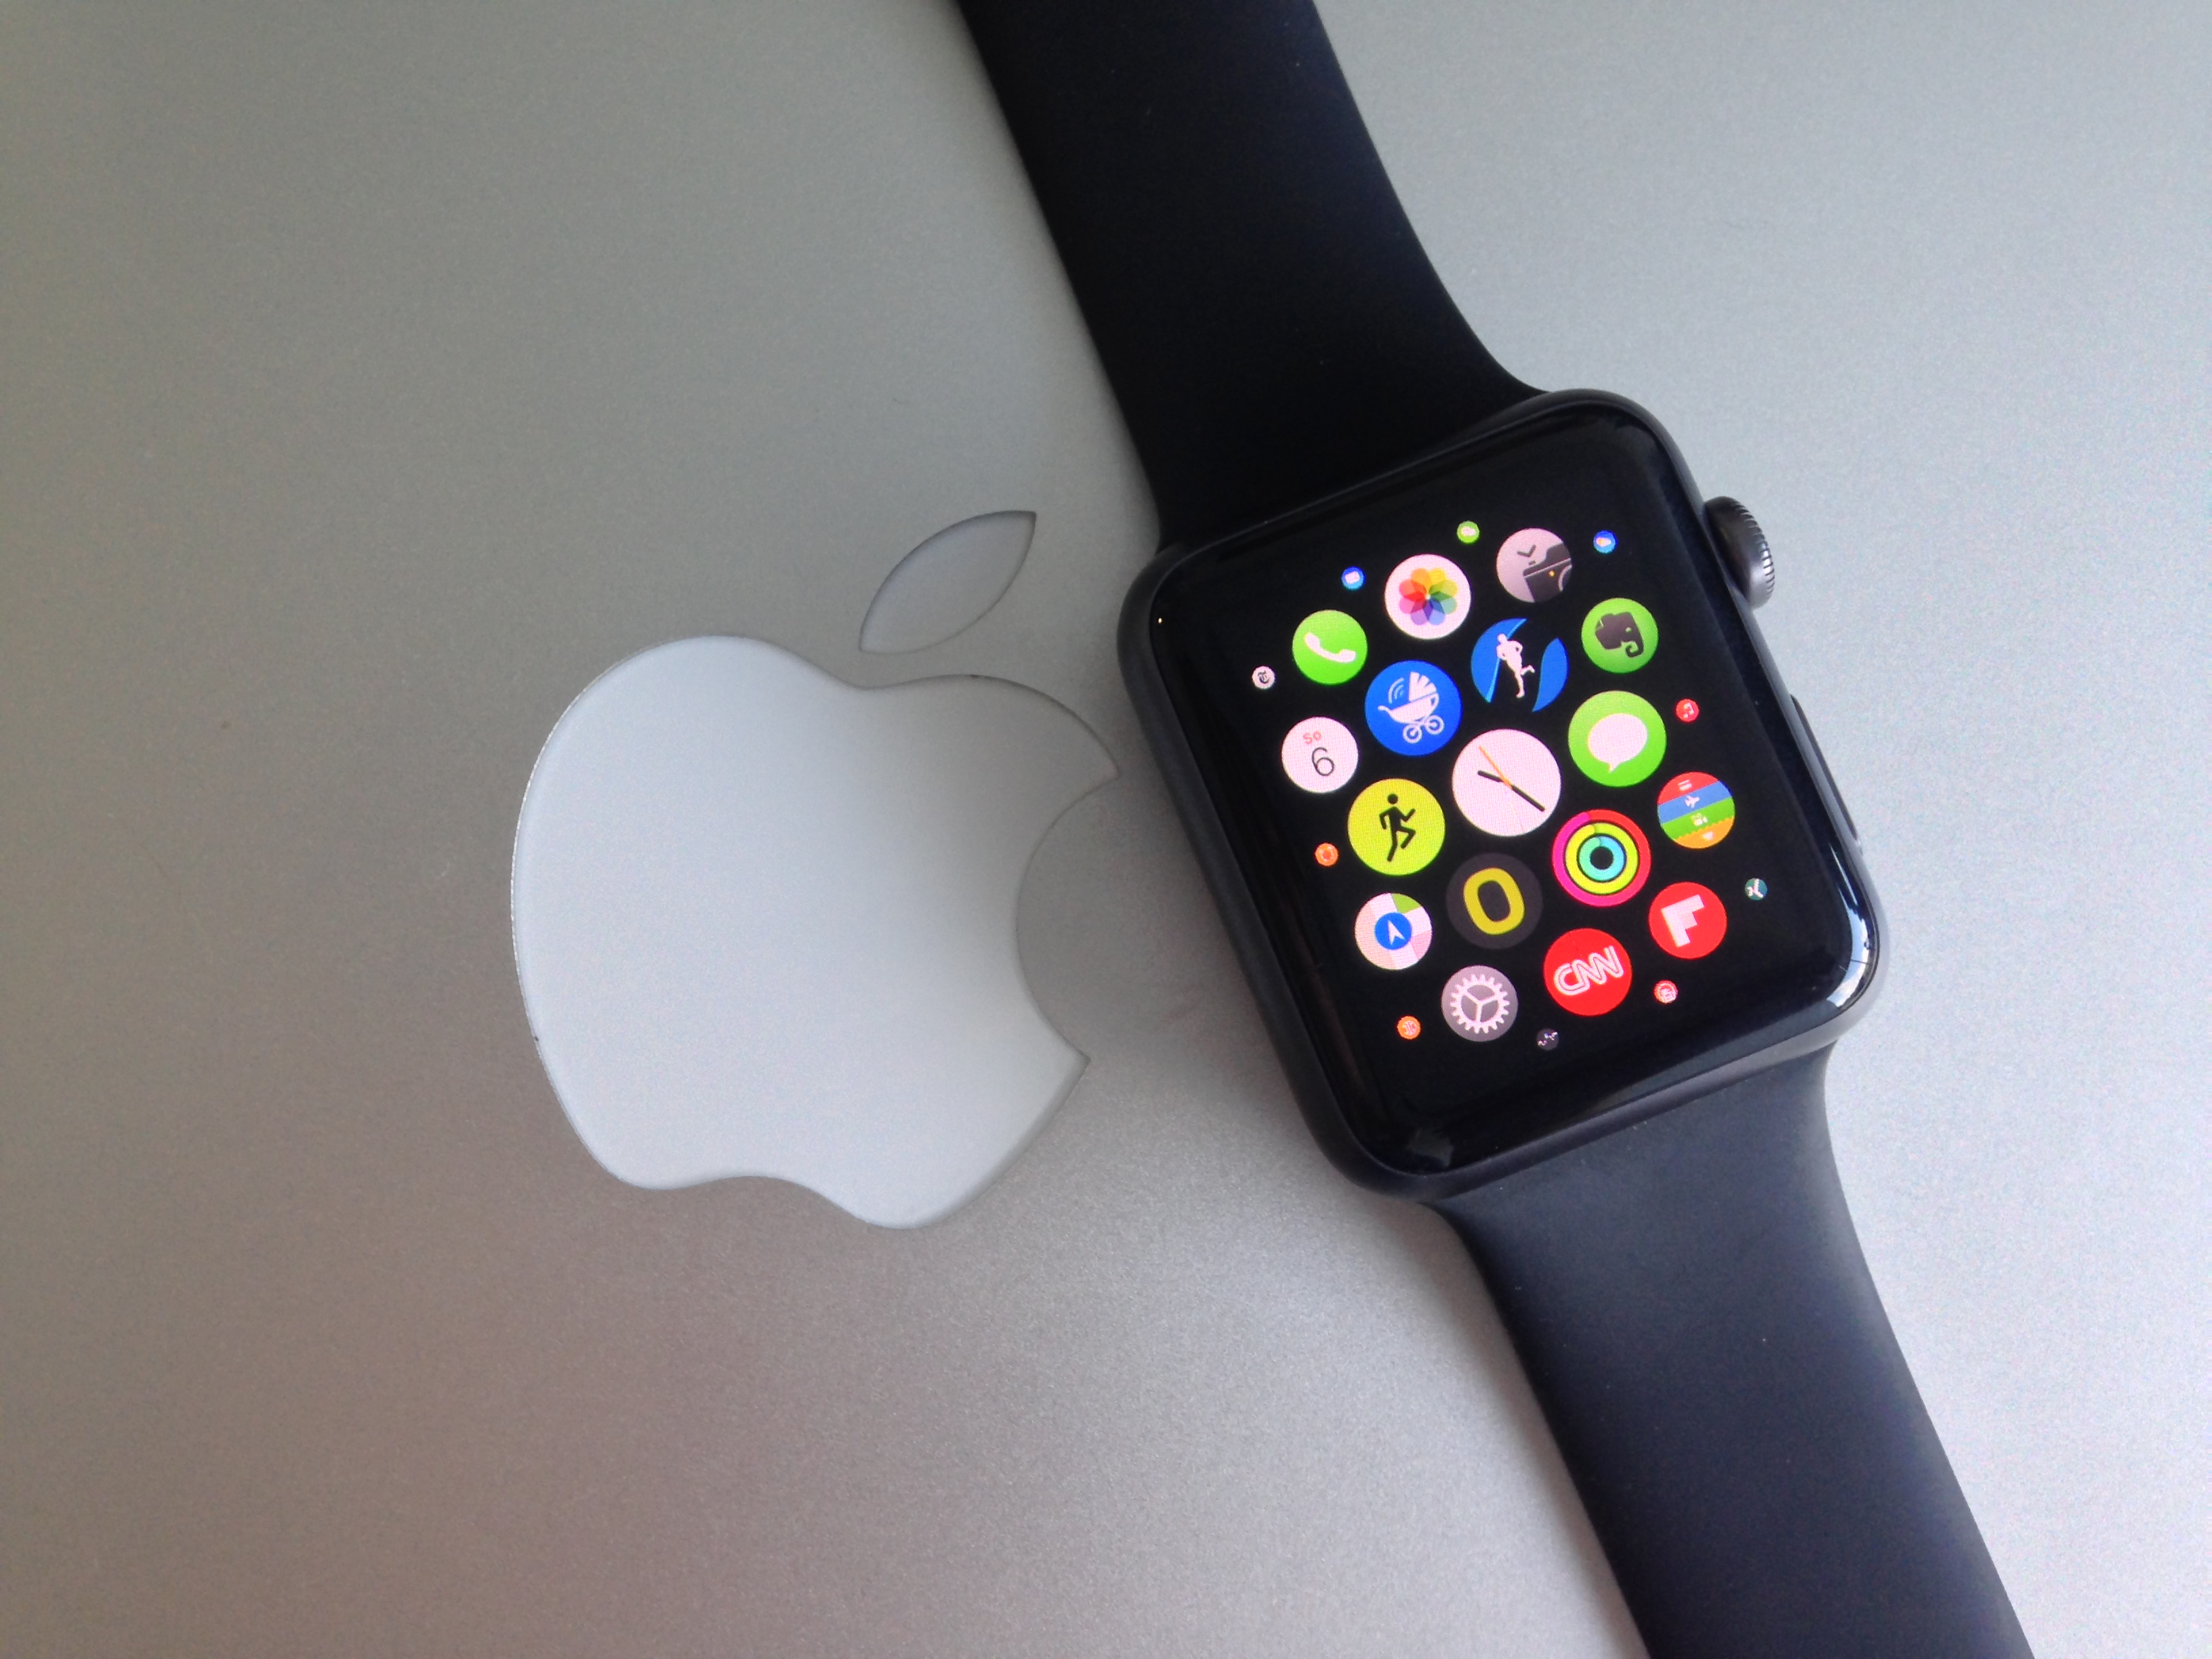 The Apple Watch with watchOS 1